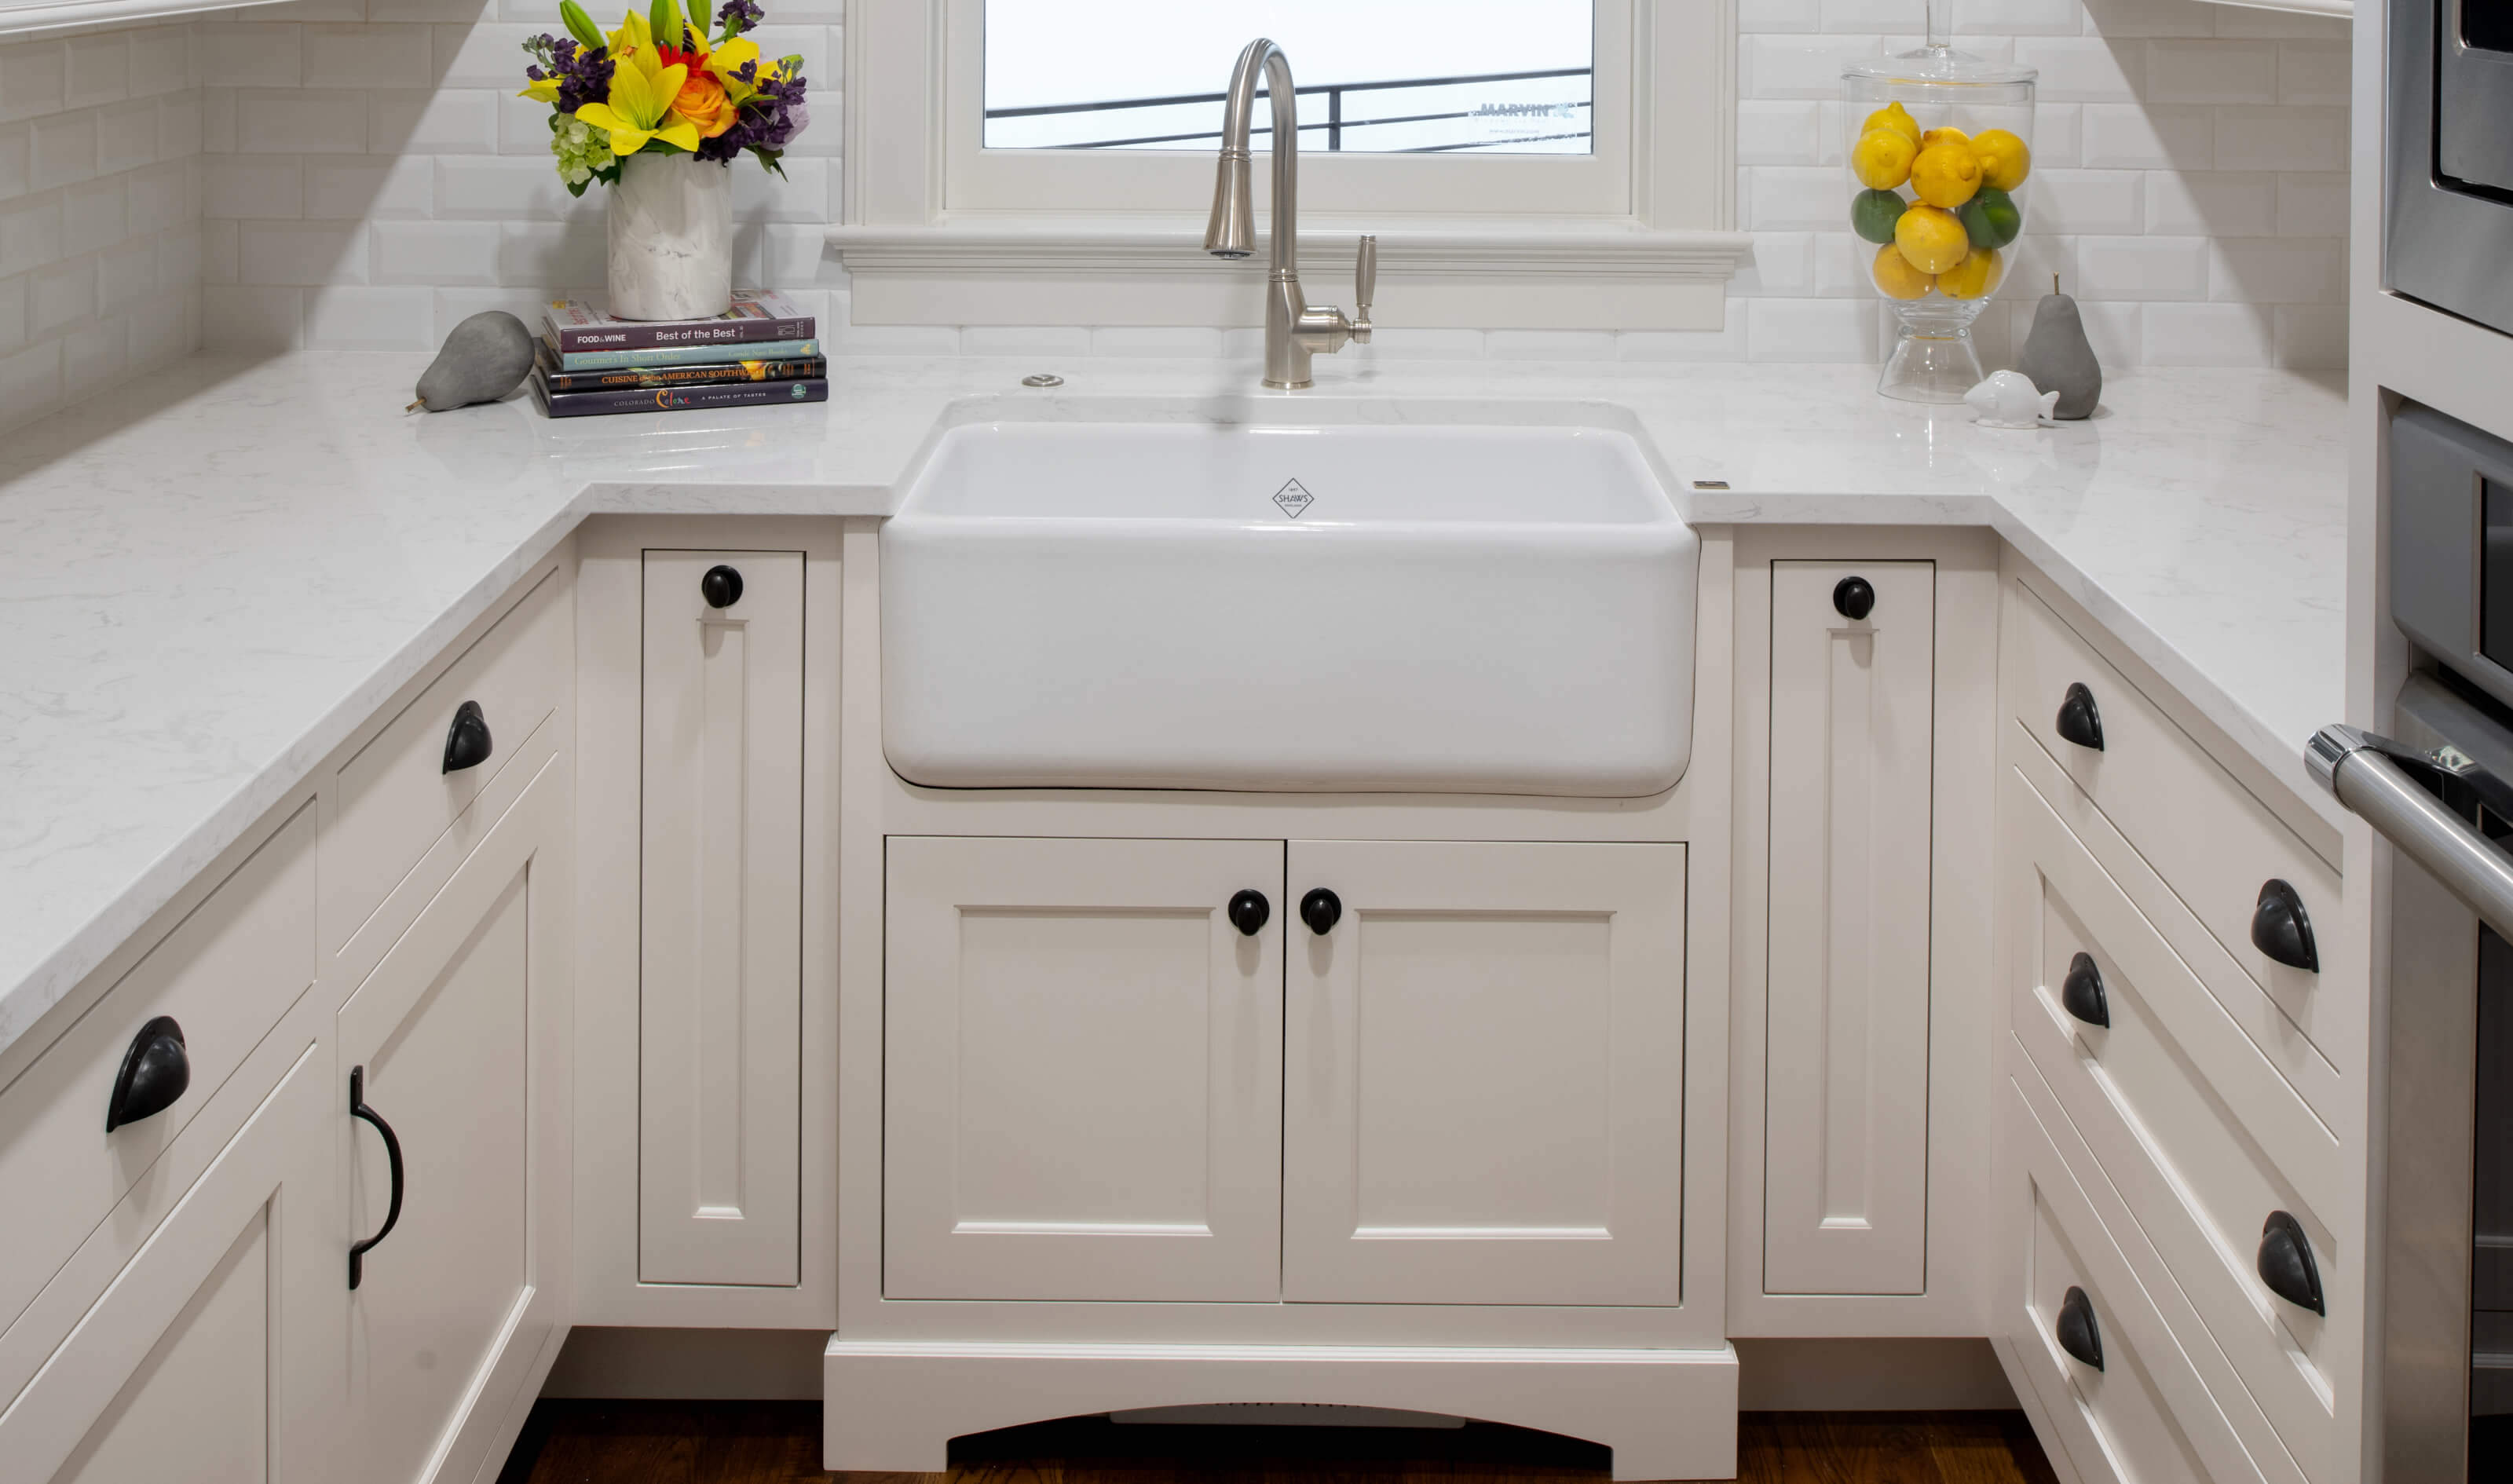 A sink base cabinet with a bump-out and decorative toe kick detail with white inset cabinets from Dura Supreme.